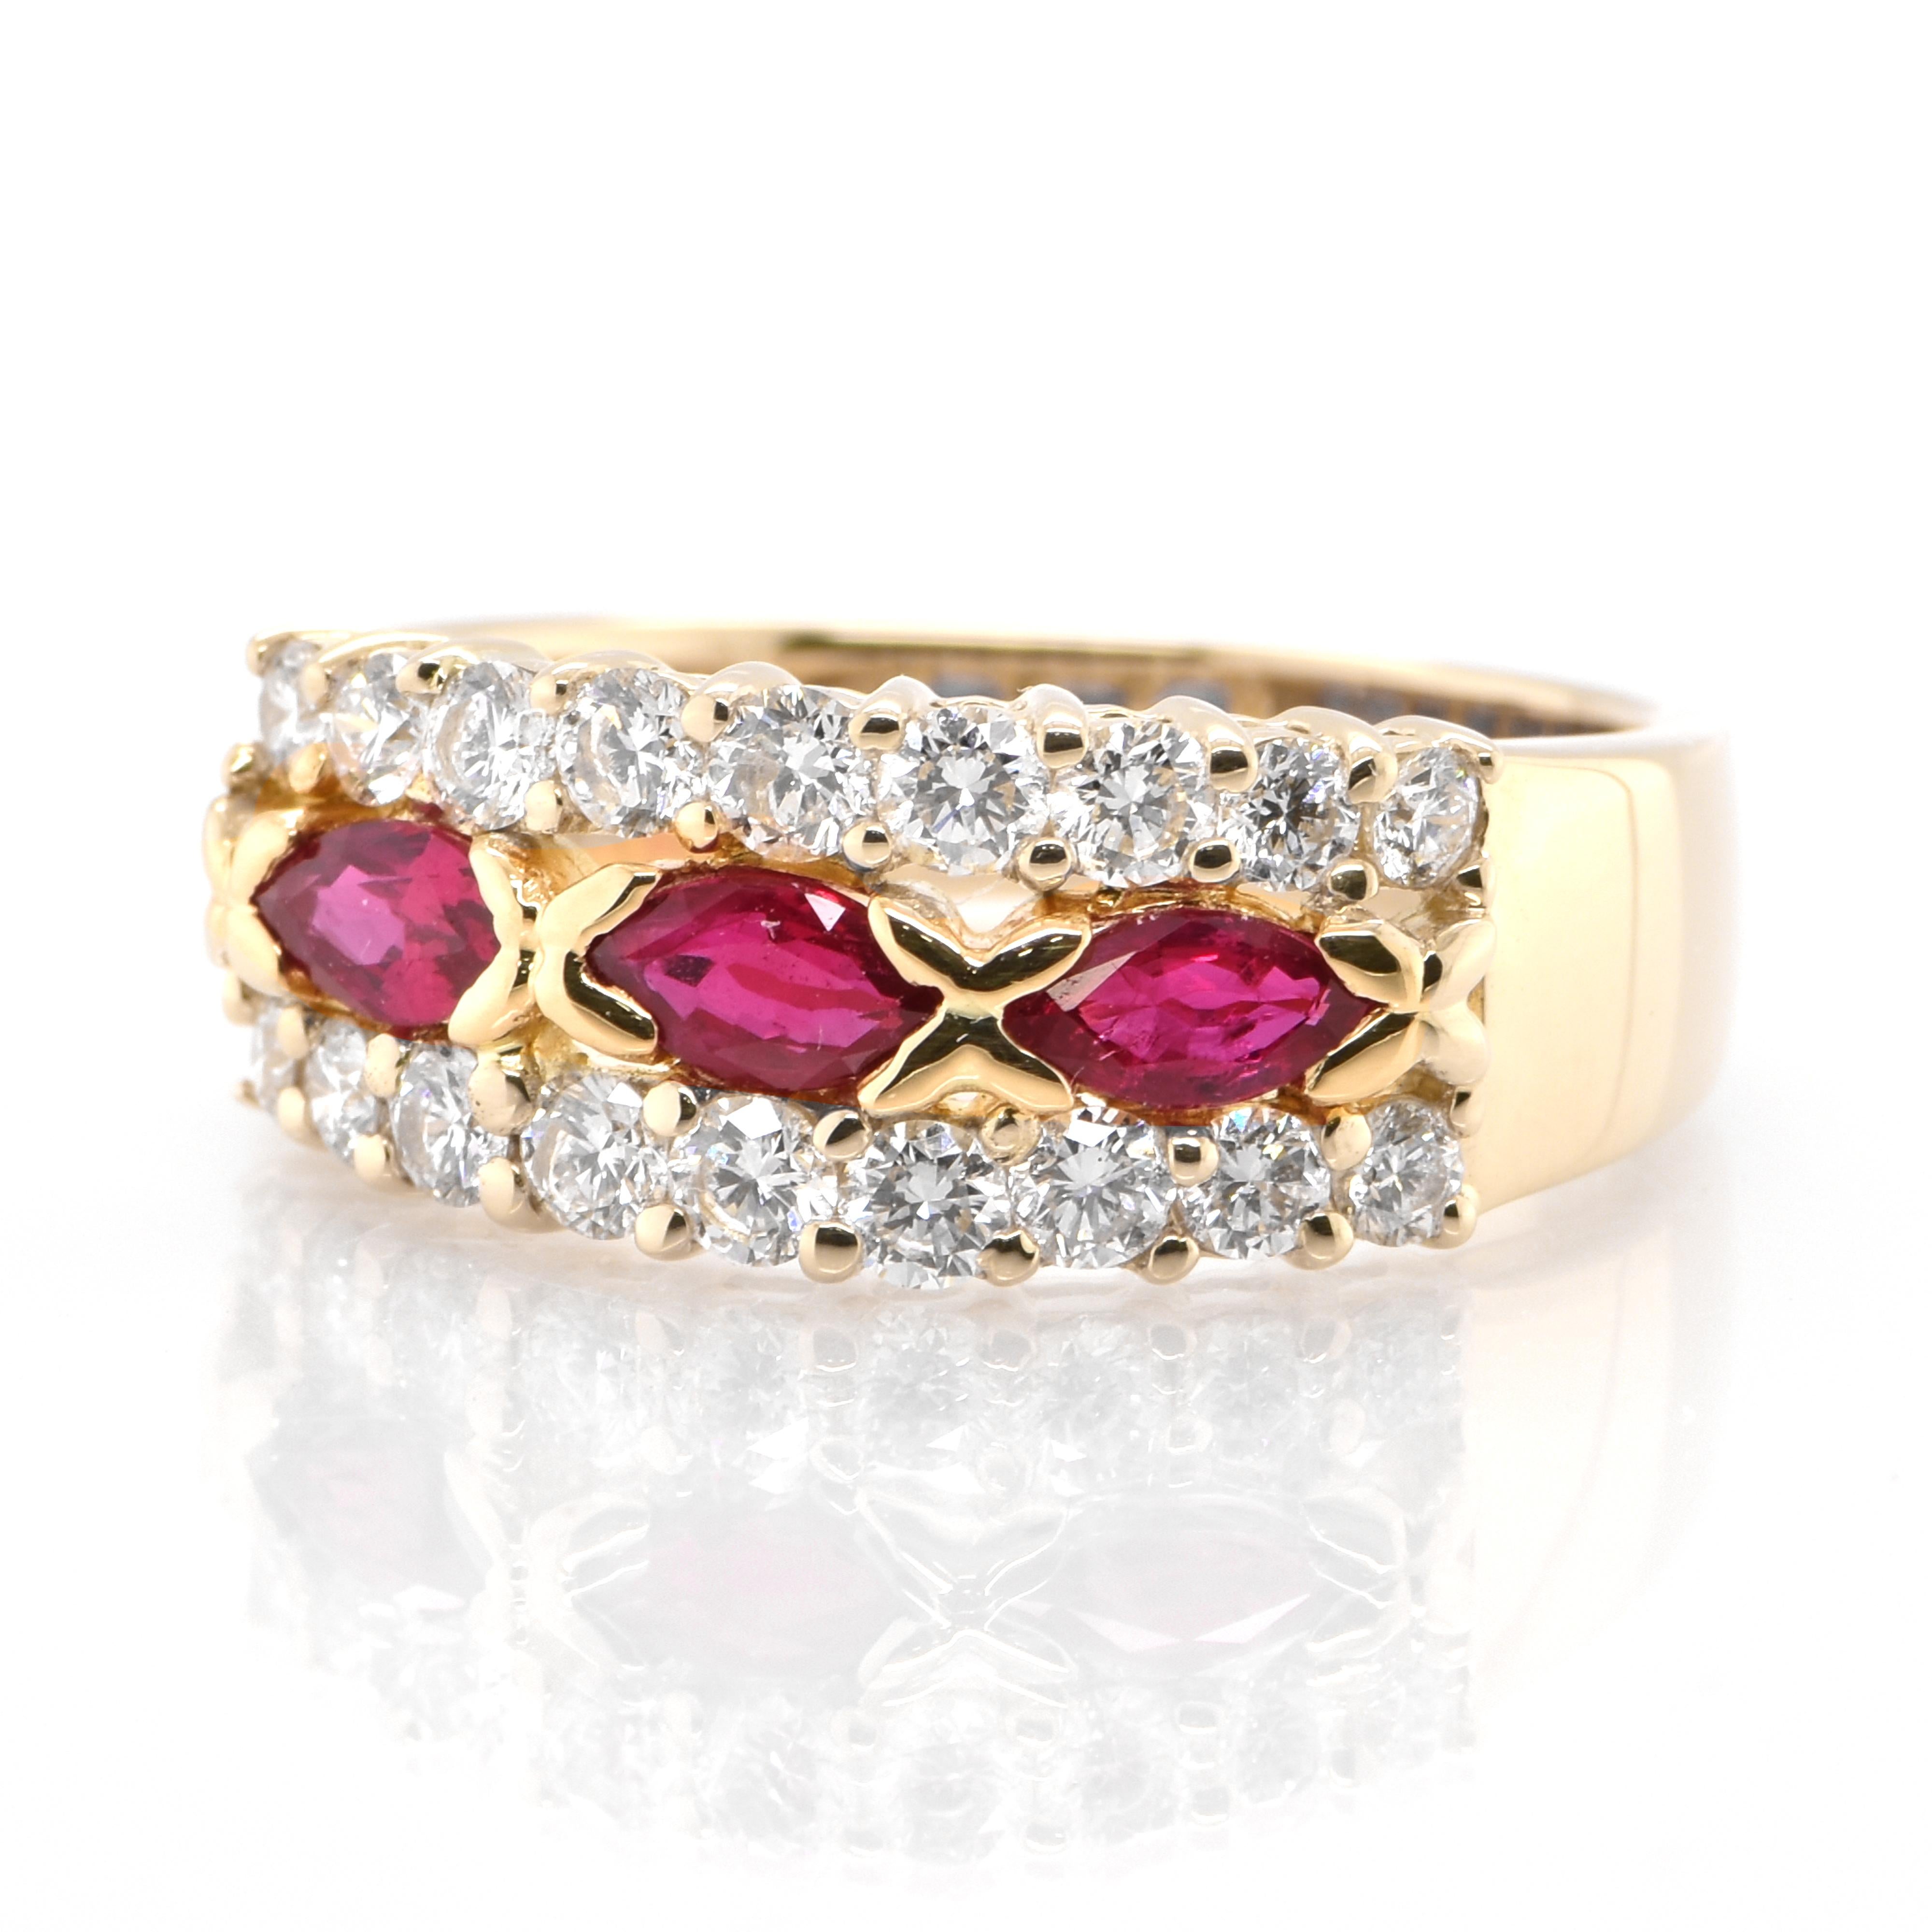 A stunning Half-Eternity Engagement Ring featuring a total of 0.72 Carats Natural Ruby and 0.70 Carats of Diamond accents set in 18 Karat Yellow Gold. Rubies are referred to as 